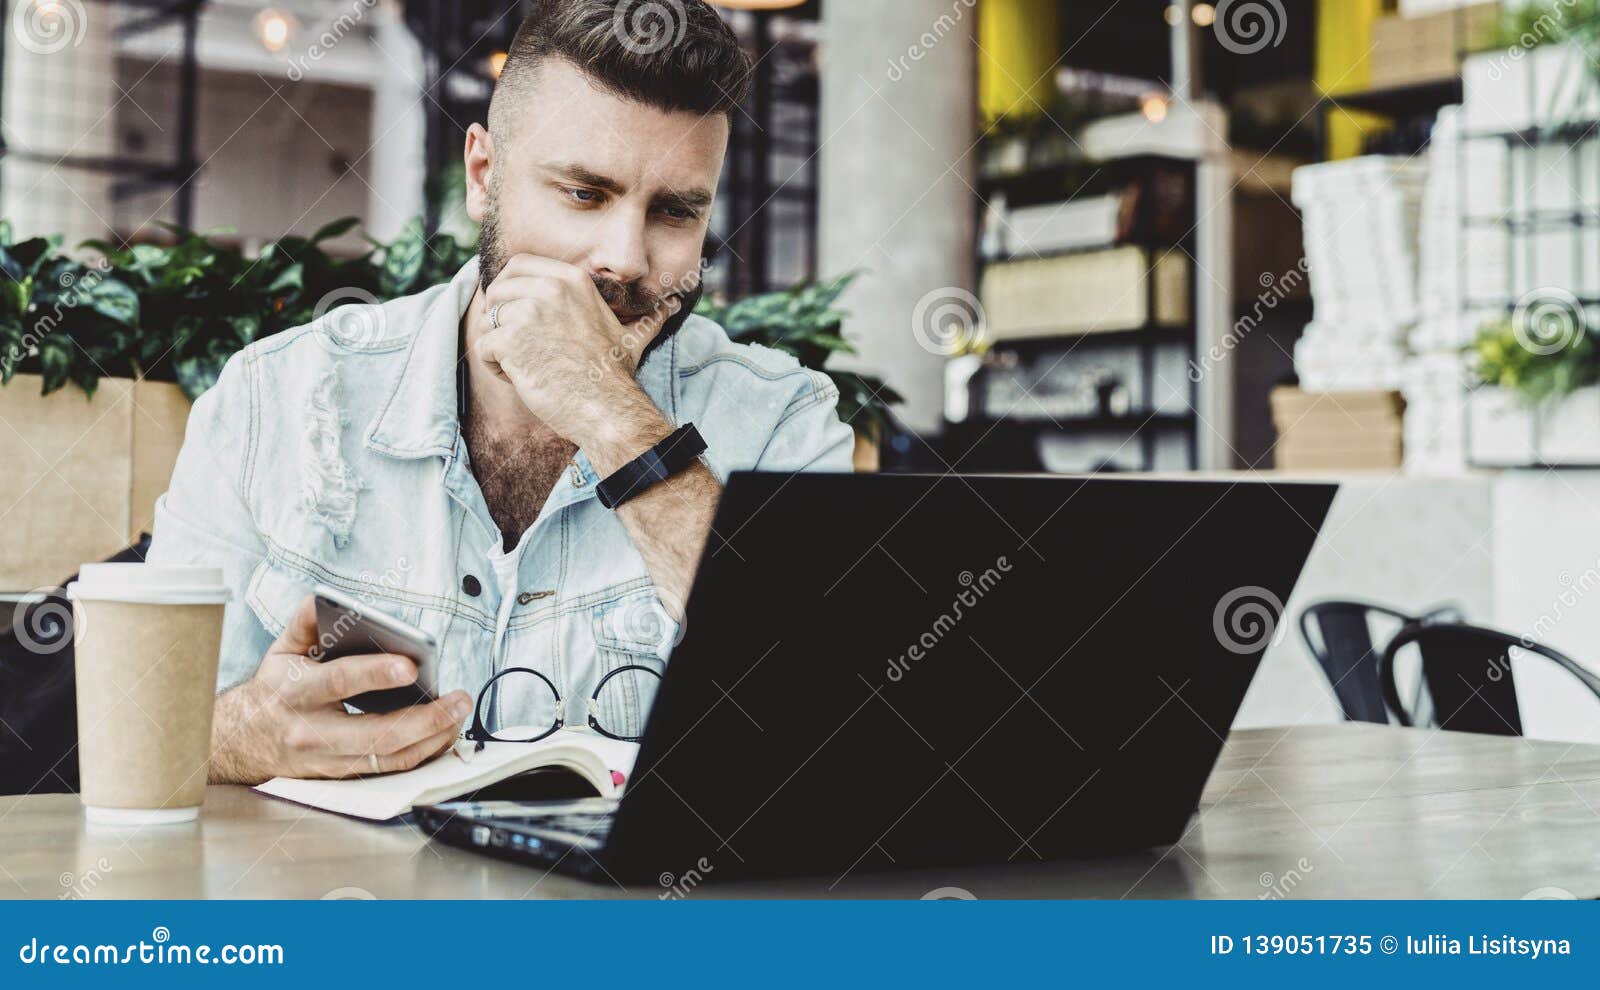 millennial businessman sitting in cafe with open laptop, looking thoughtfully at computer screen, holding smartphone.